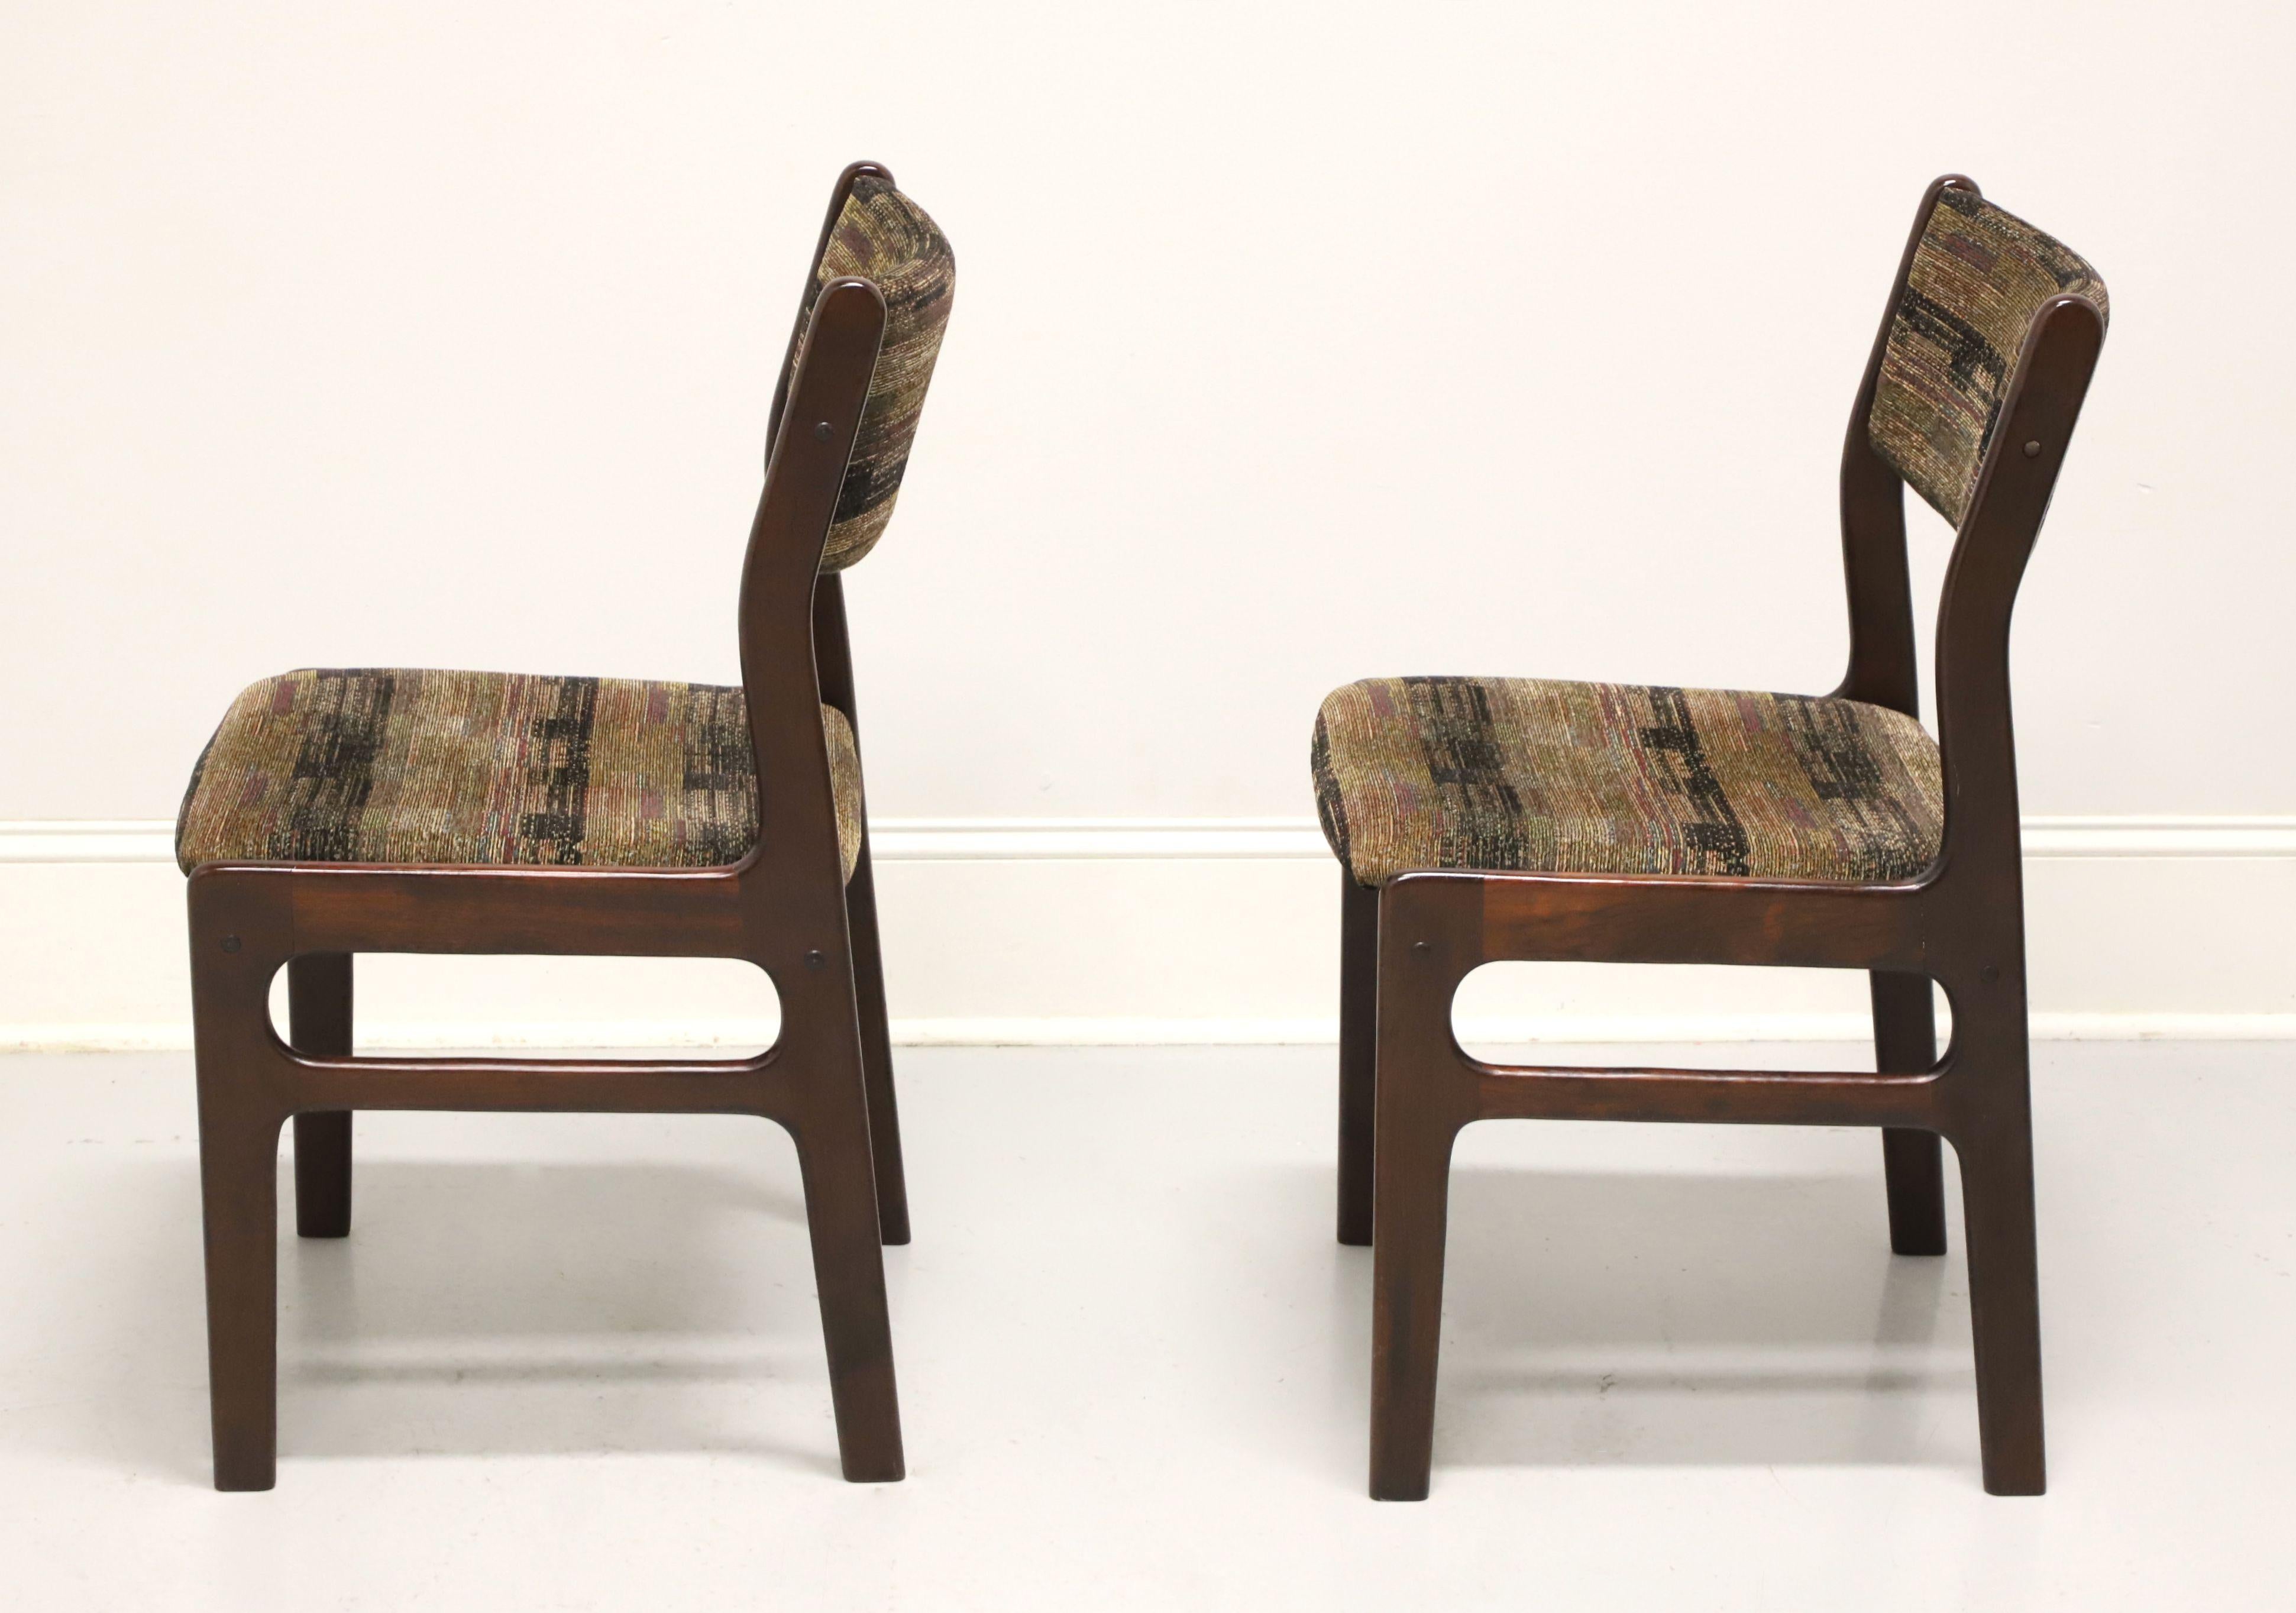 20ième siècle DYRLUND Mid 20th Century Rosewood Danish Modern Dining Side Chairs - Pair A en vente